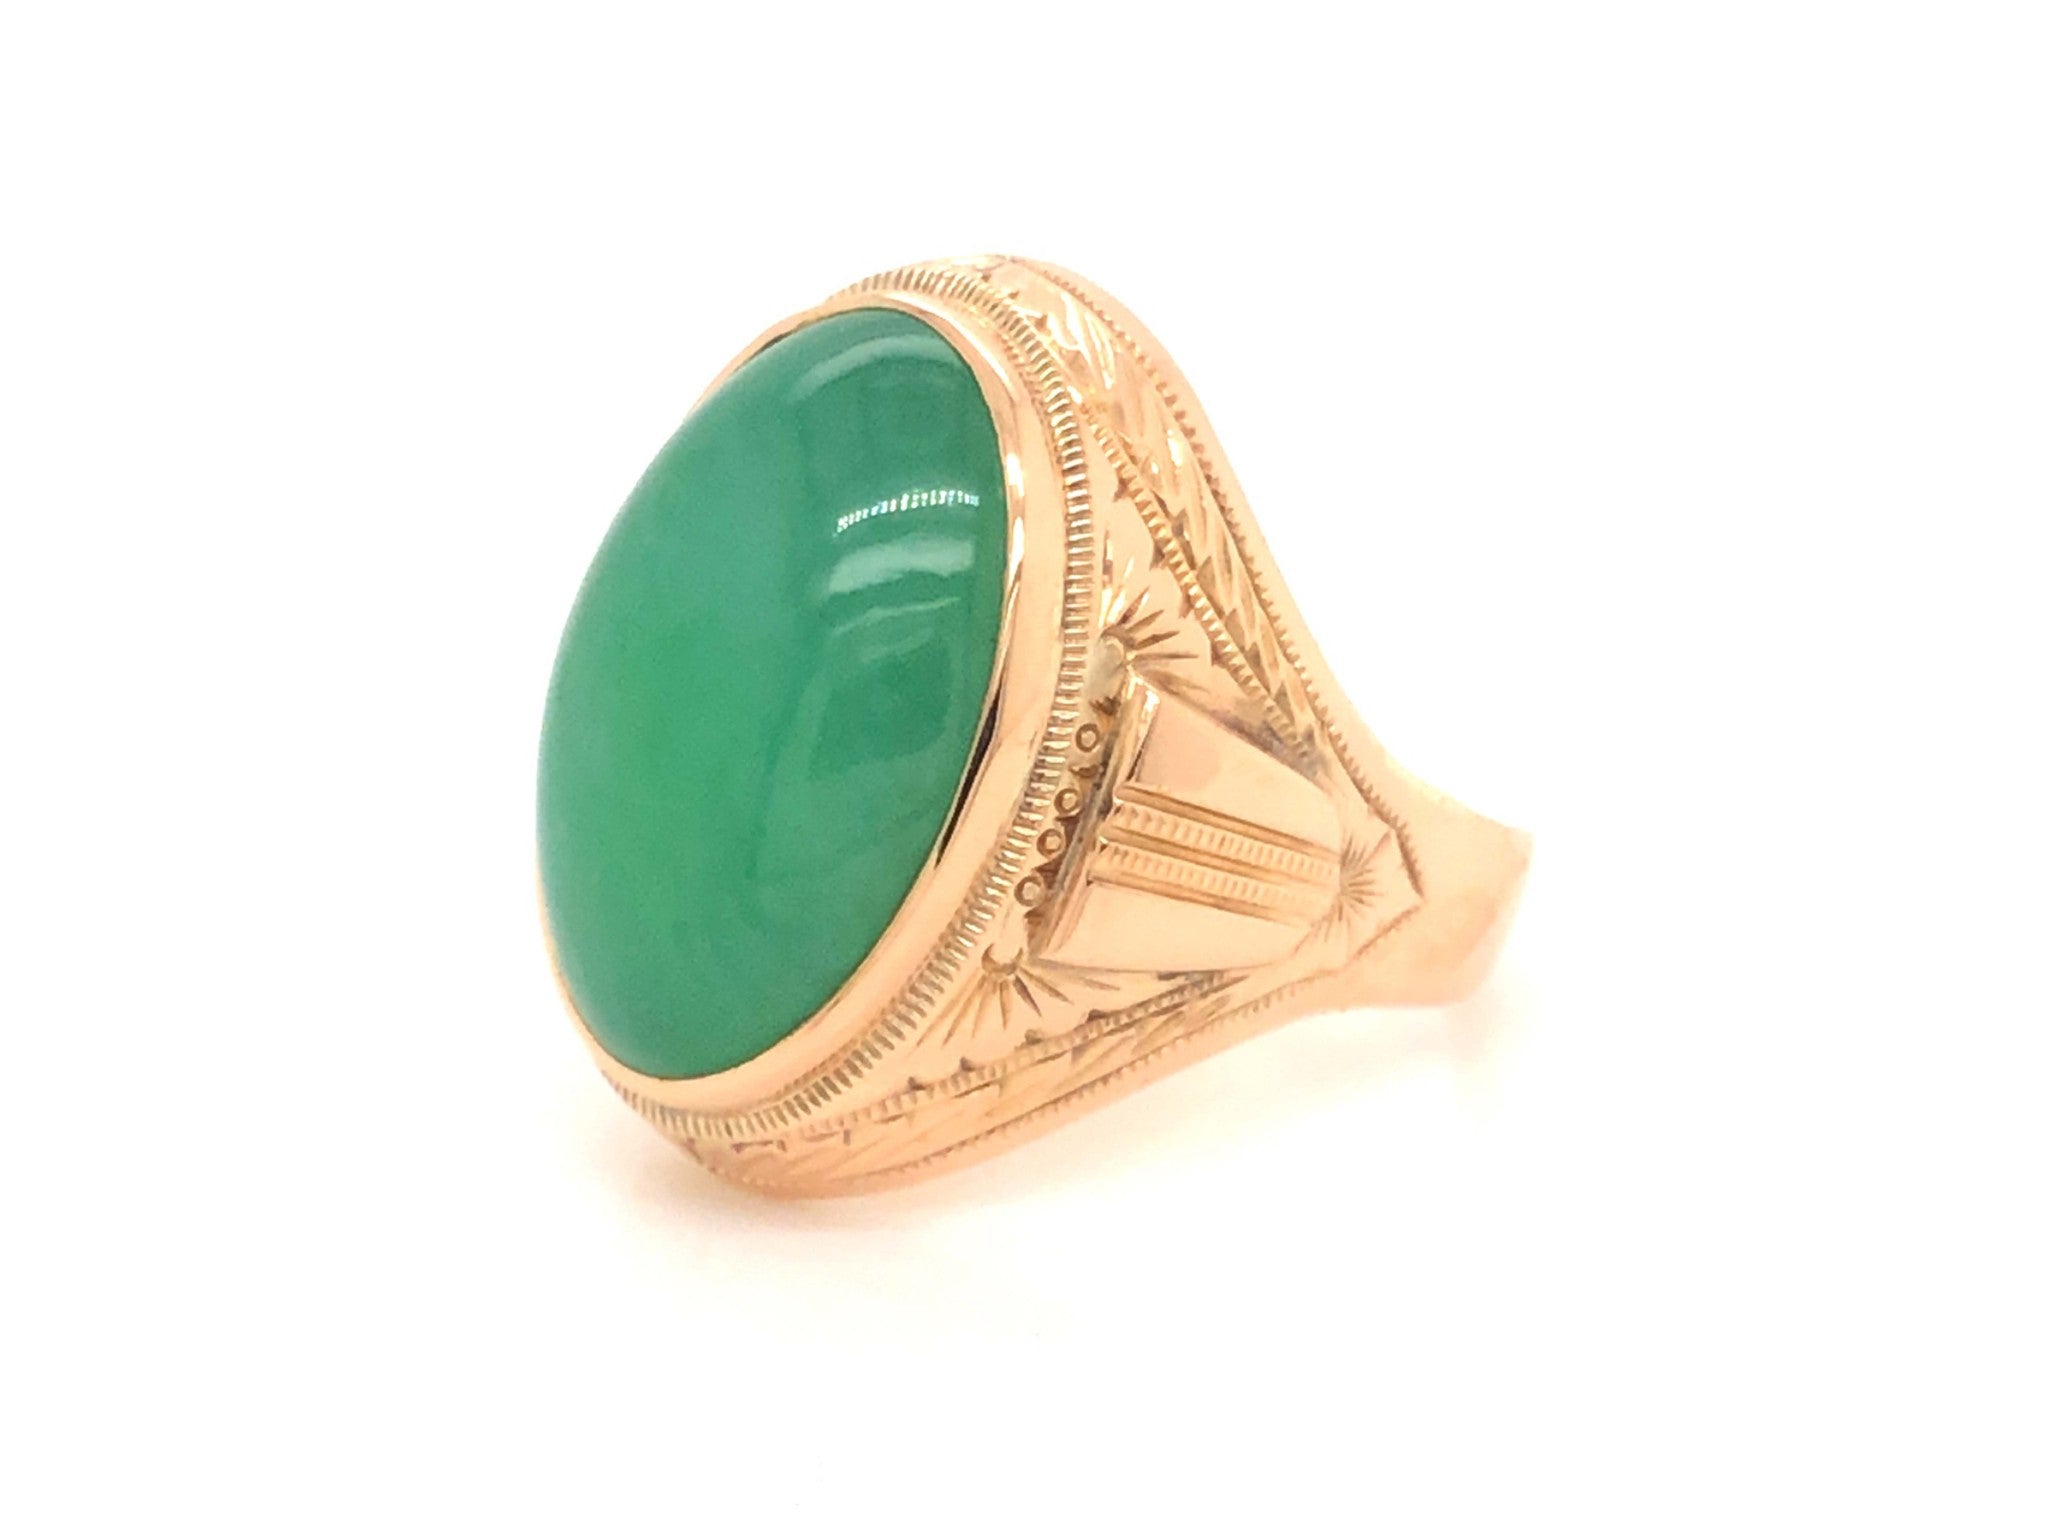 Vintage Men's Oval Cabochon Green Jade Ring - 14k Yellow Gold